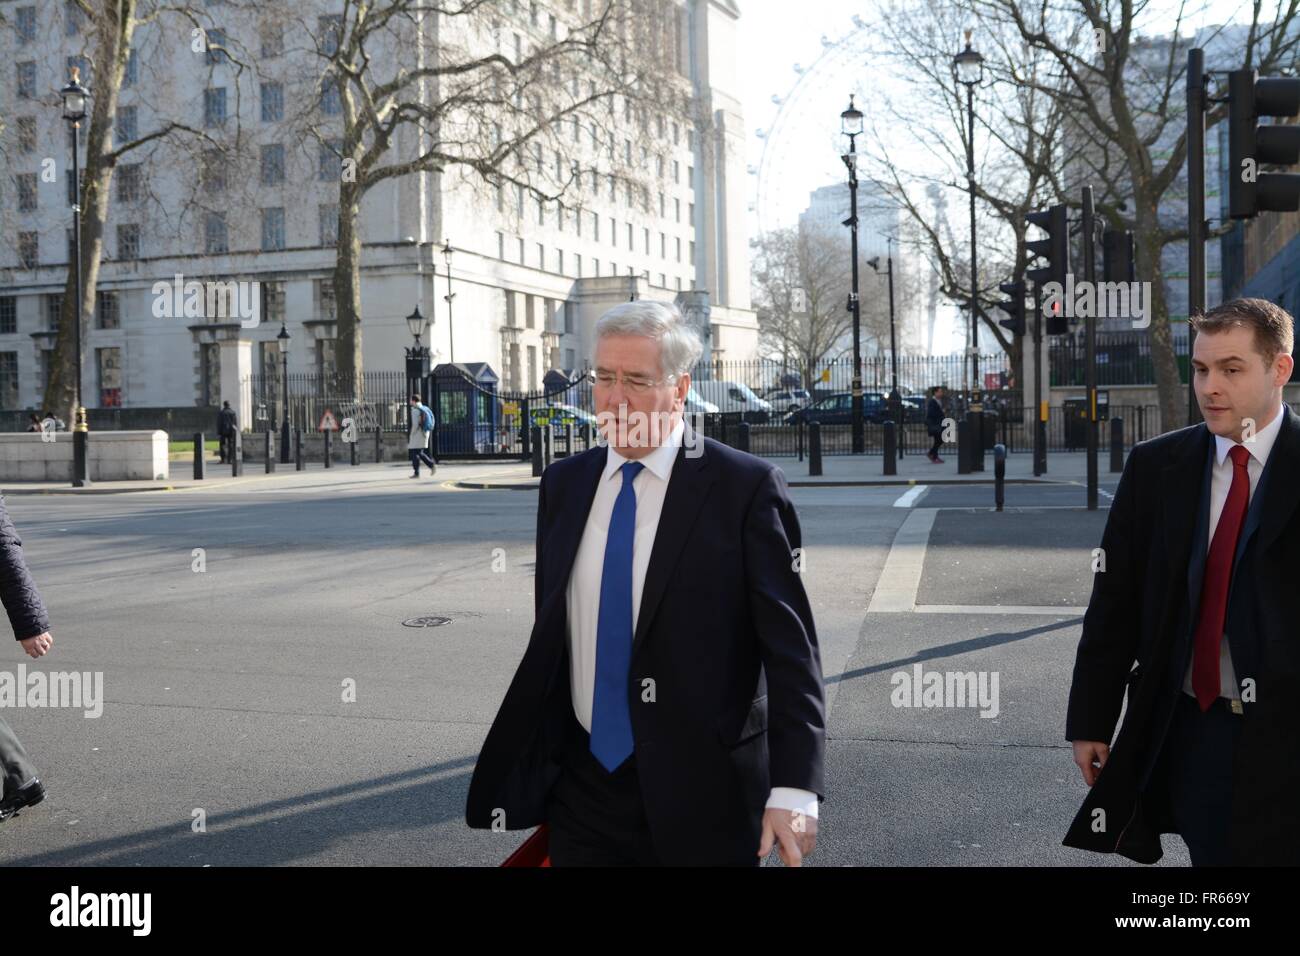 London, UK. 22nd March, 2016. Michael Fallon MP, UK Secretary of State for Defence, arrives at Downing Street flanked by government aides as reports surface of a terror attack in Brussels, Belgium. Credit: Marc Ward/Alamy Live News Stock Photo